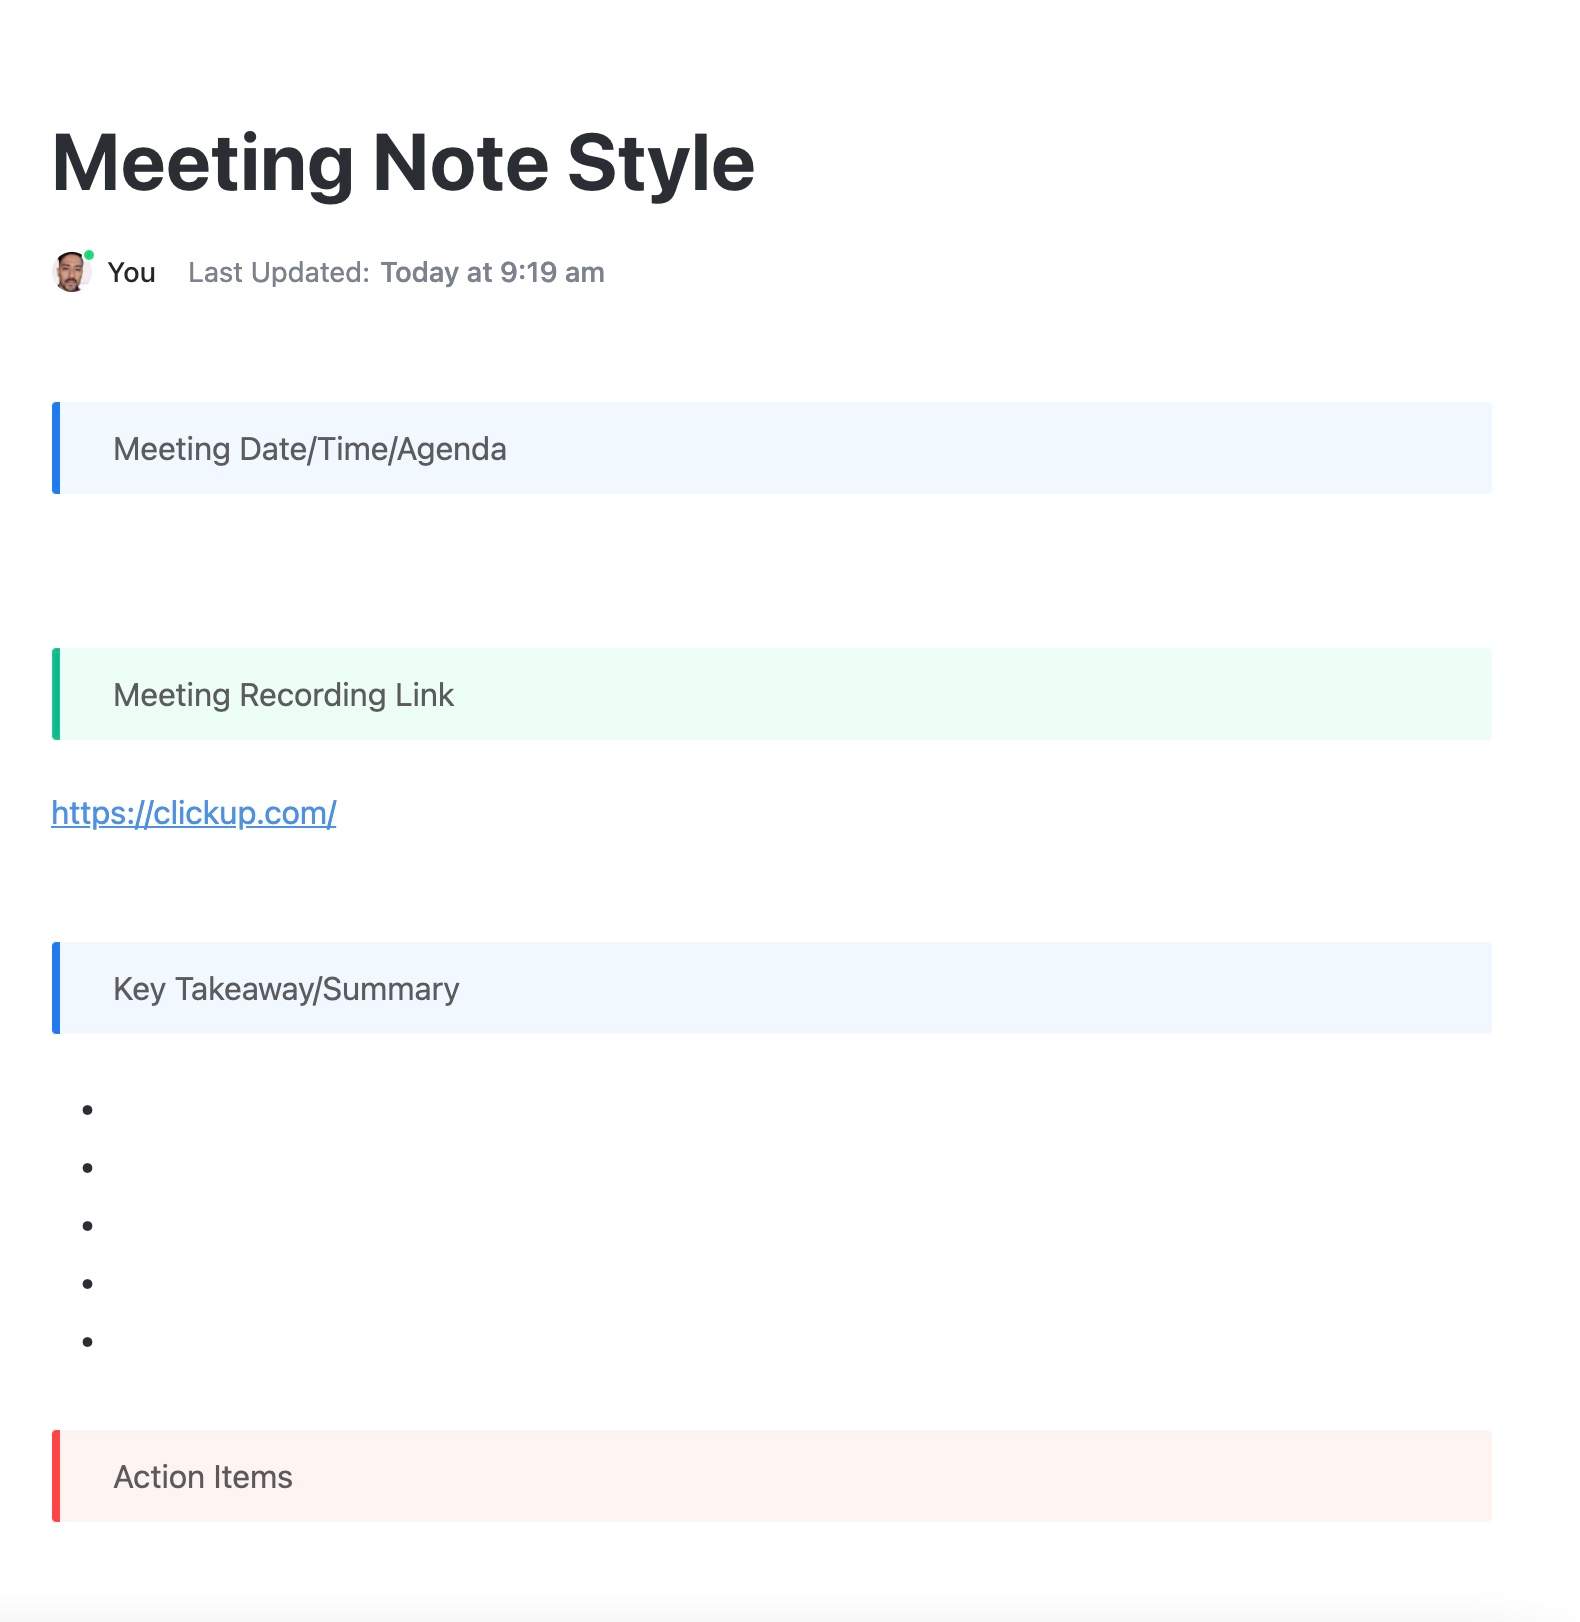 The purpose of this Doc is to serve as a way to document all event meeting notes, key takeaways and action items.